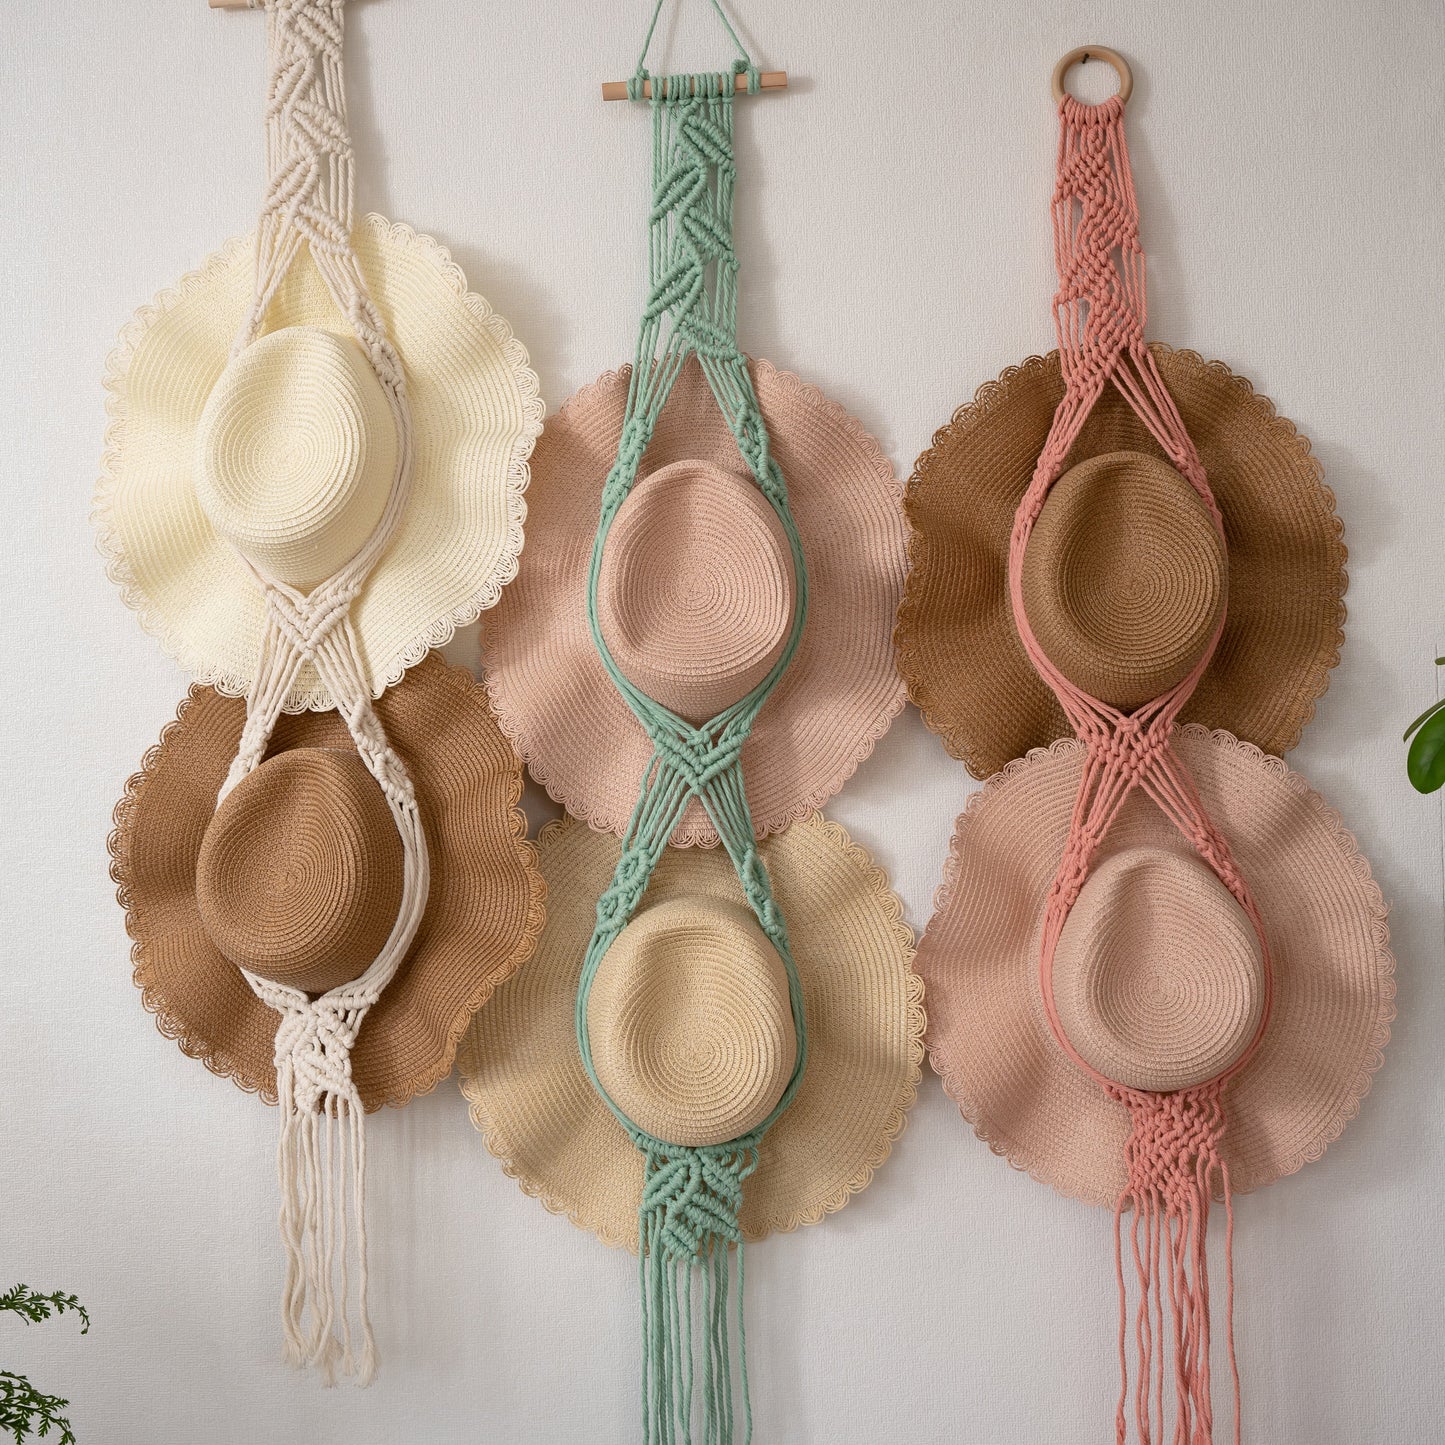 Leaf Macrame Wall Hanging for Hat Storage & Display Collection